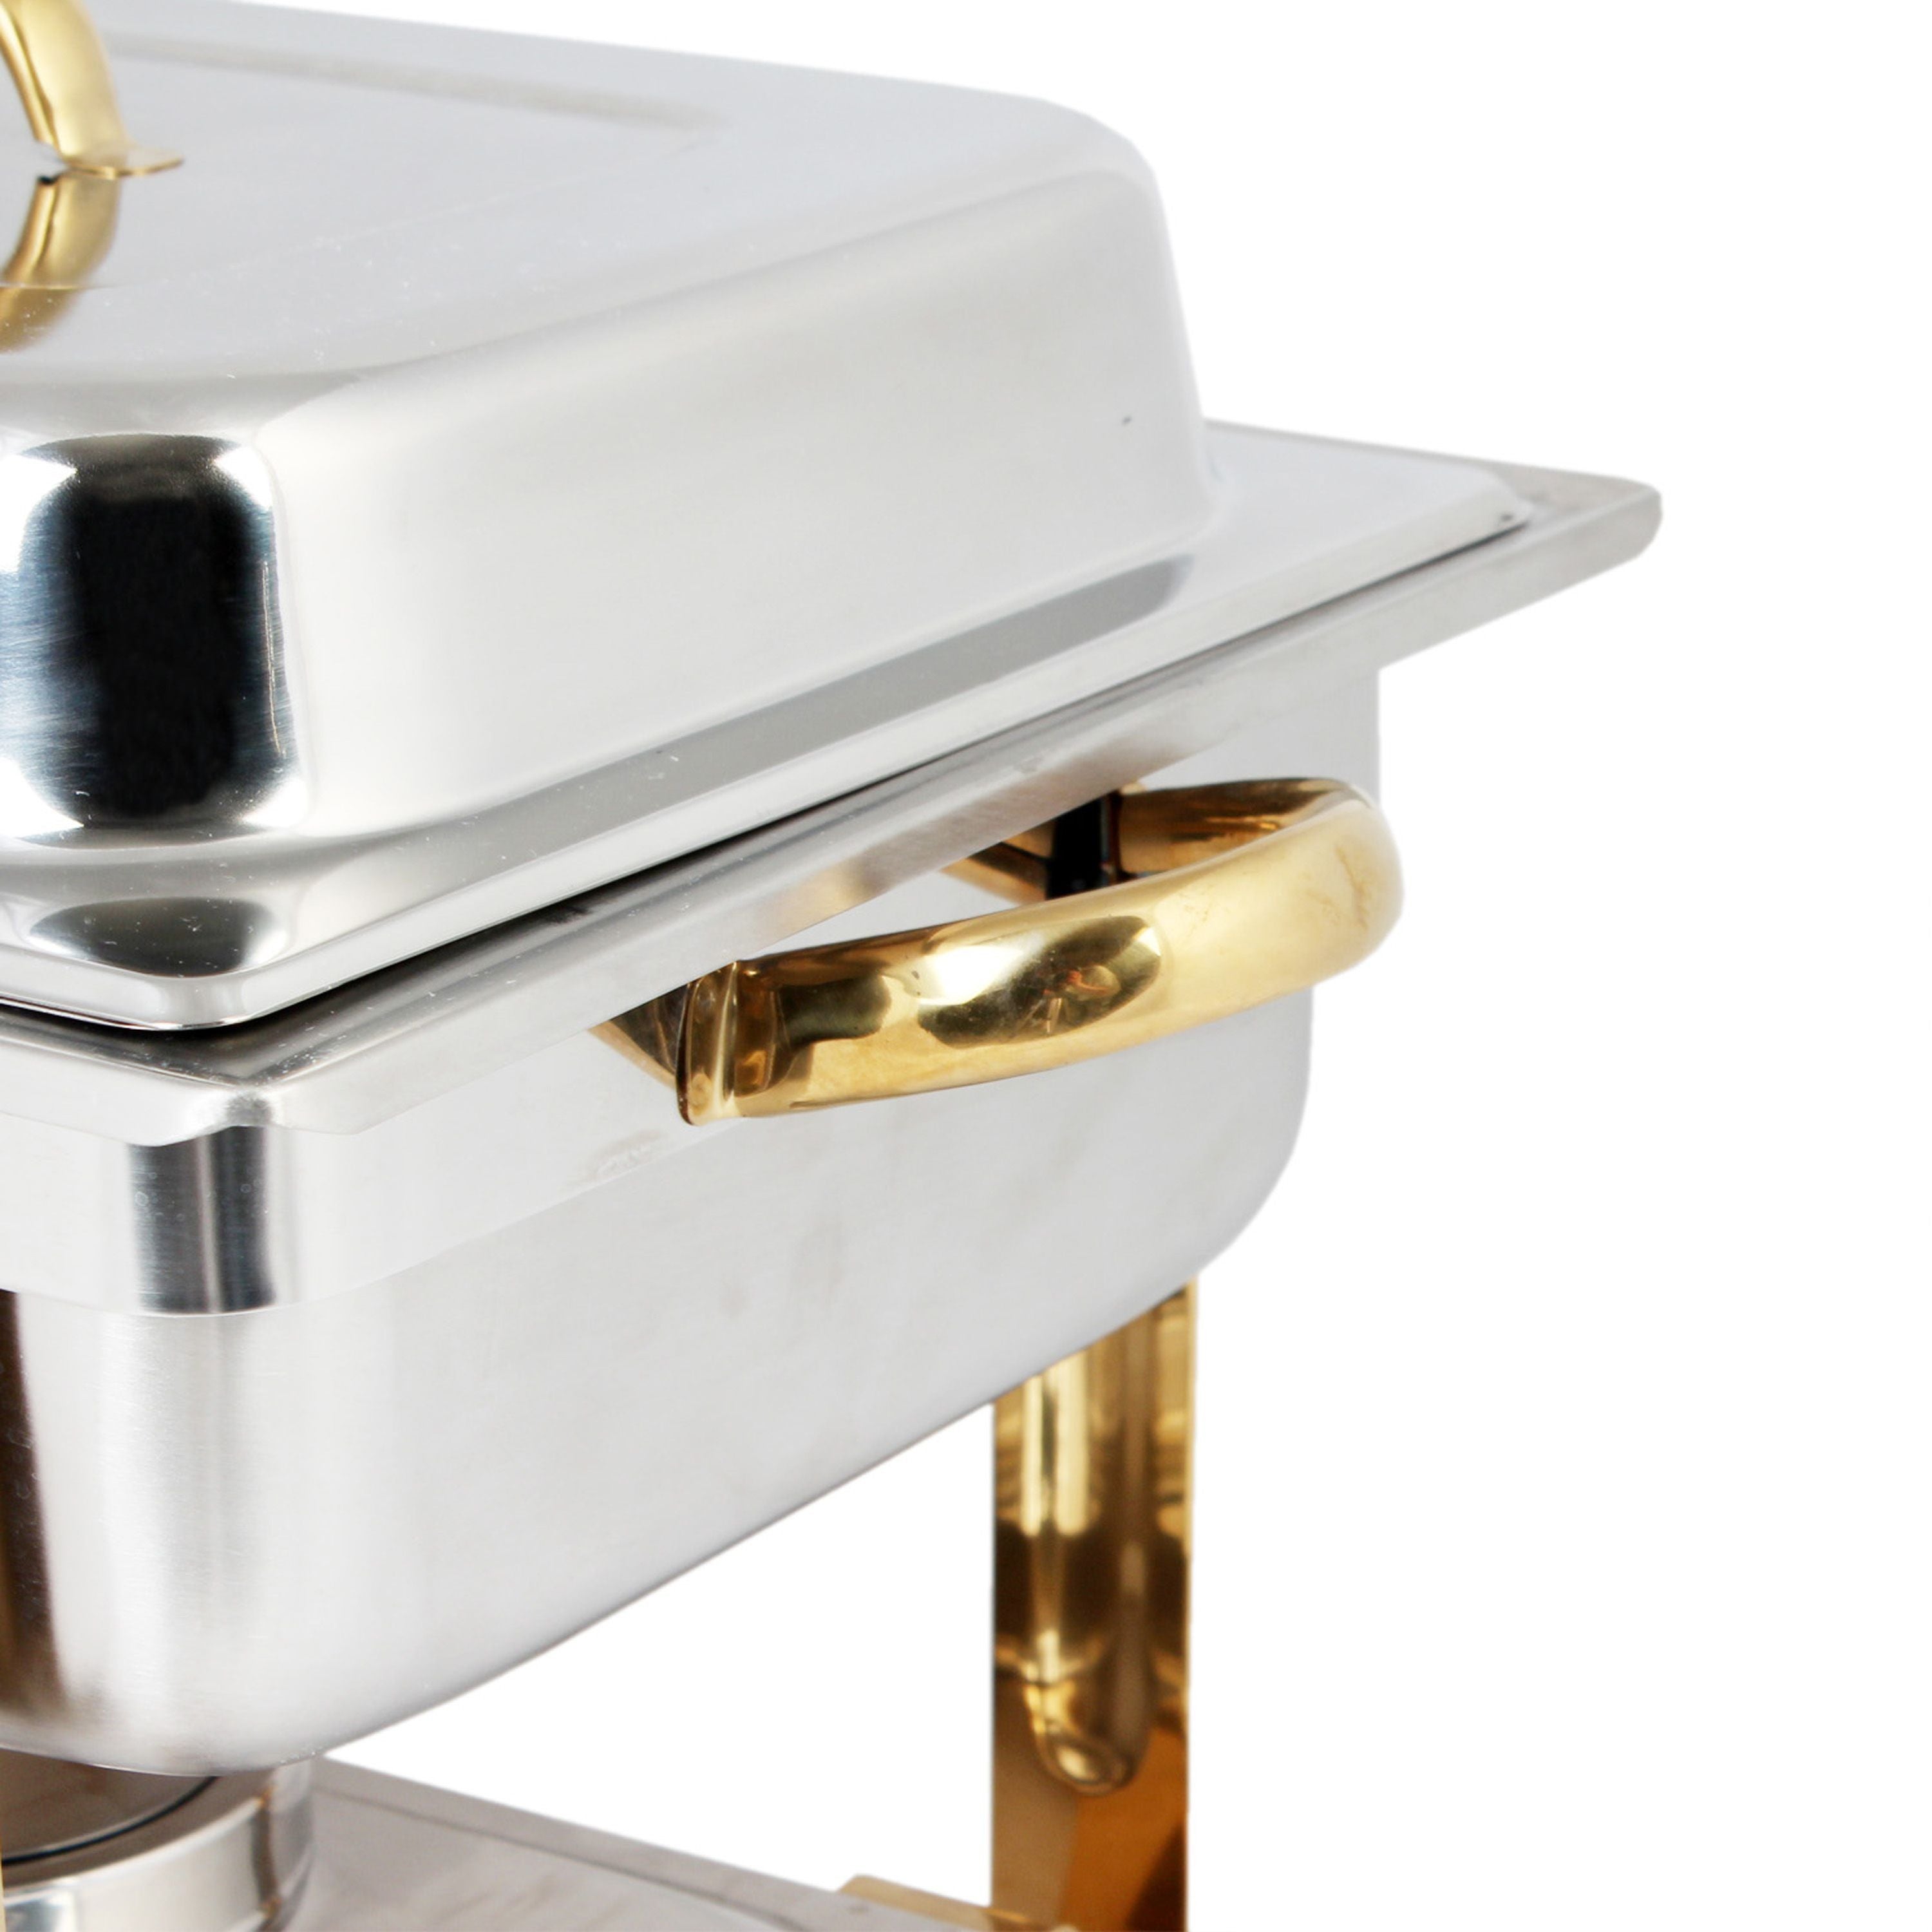 Thunder Group SLRCF0834GH 4-Quart Gold Accented Chafer